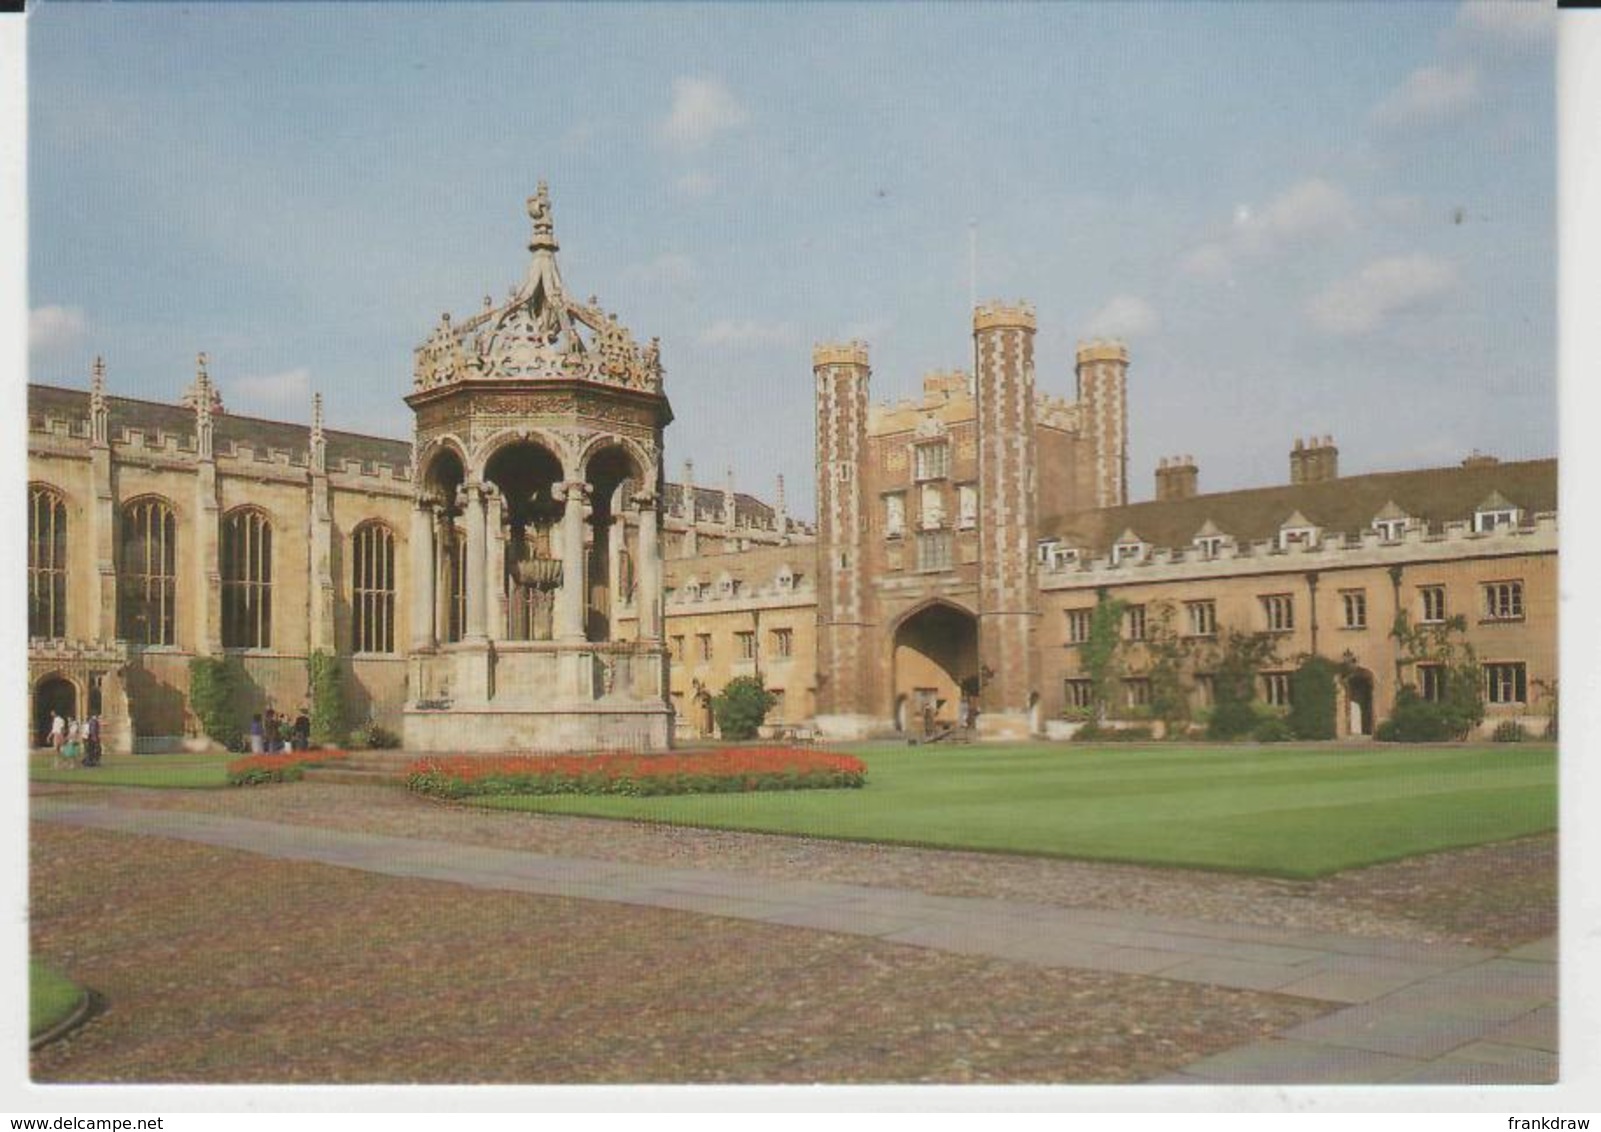 Postcard - Fountain Great Court - Trinity College  - Unused Very Good - Unclassified